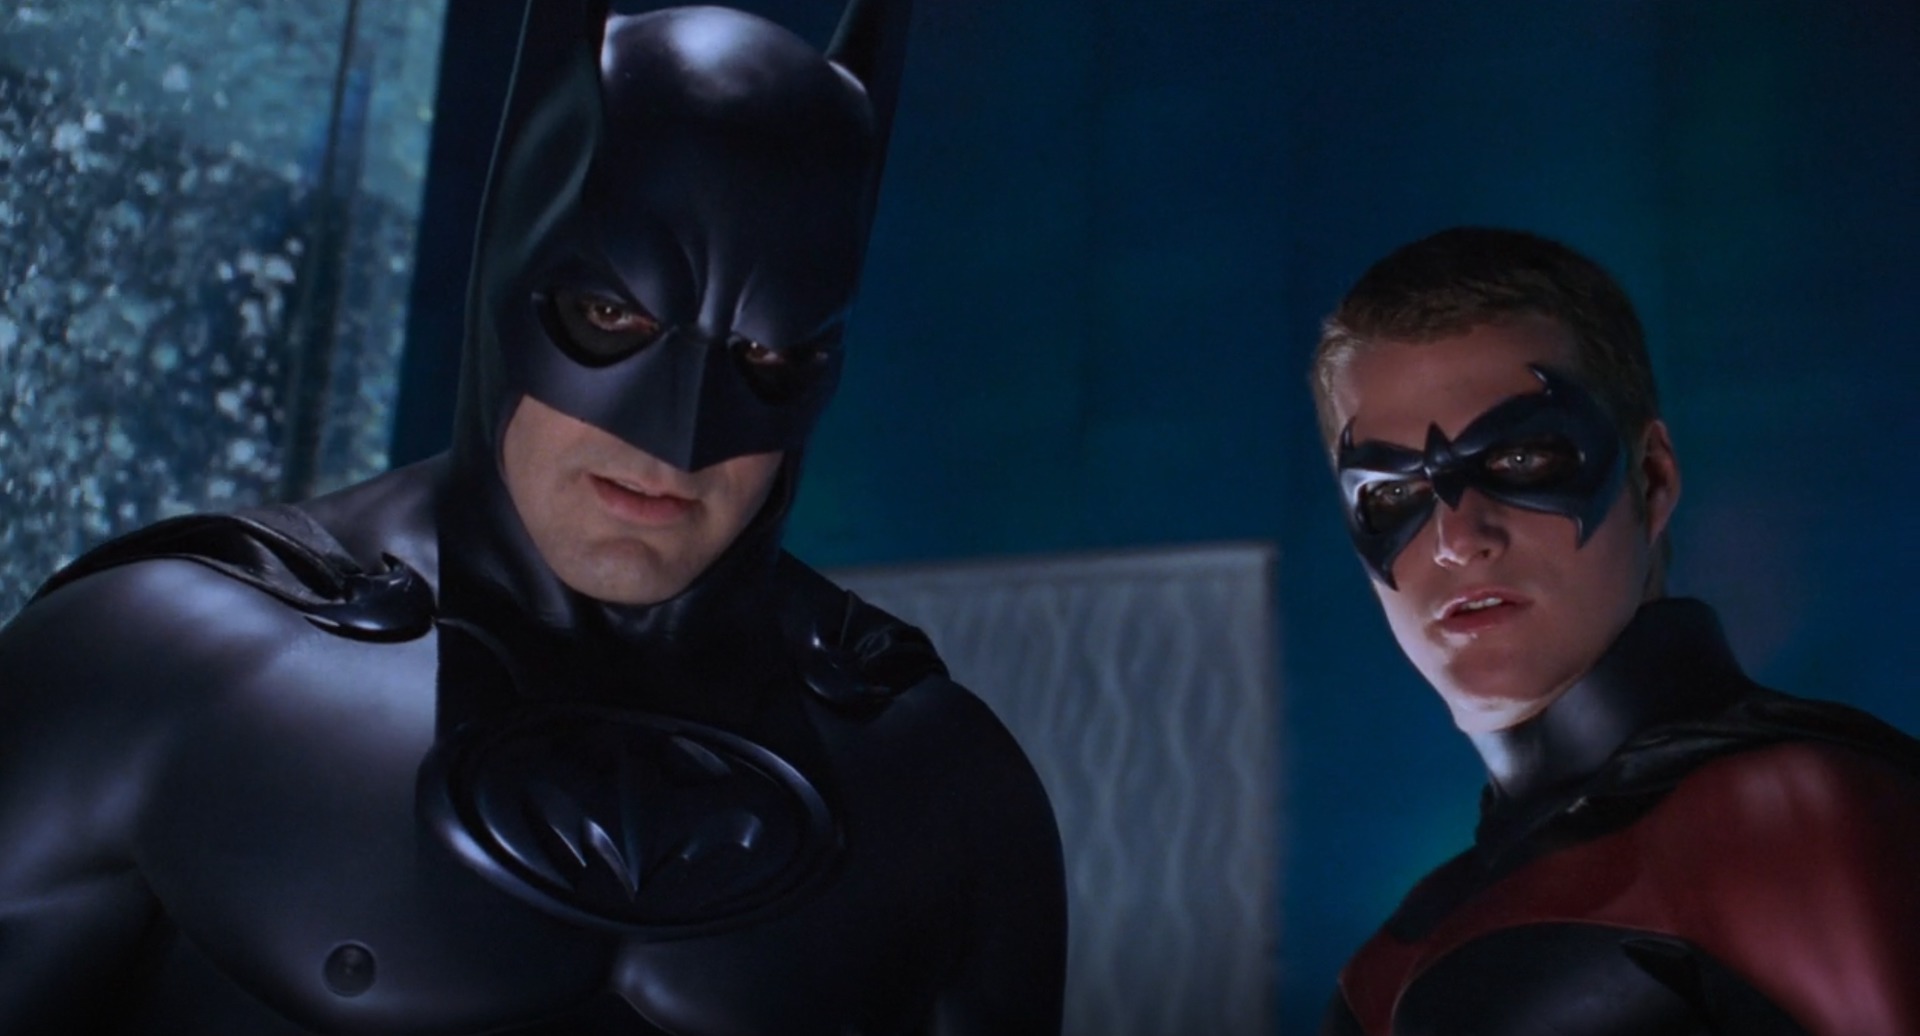 George Clooney as Batman and Chris O’Donnell as Robin in Batman & Robin (1997), Warner Bros. Pictures